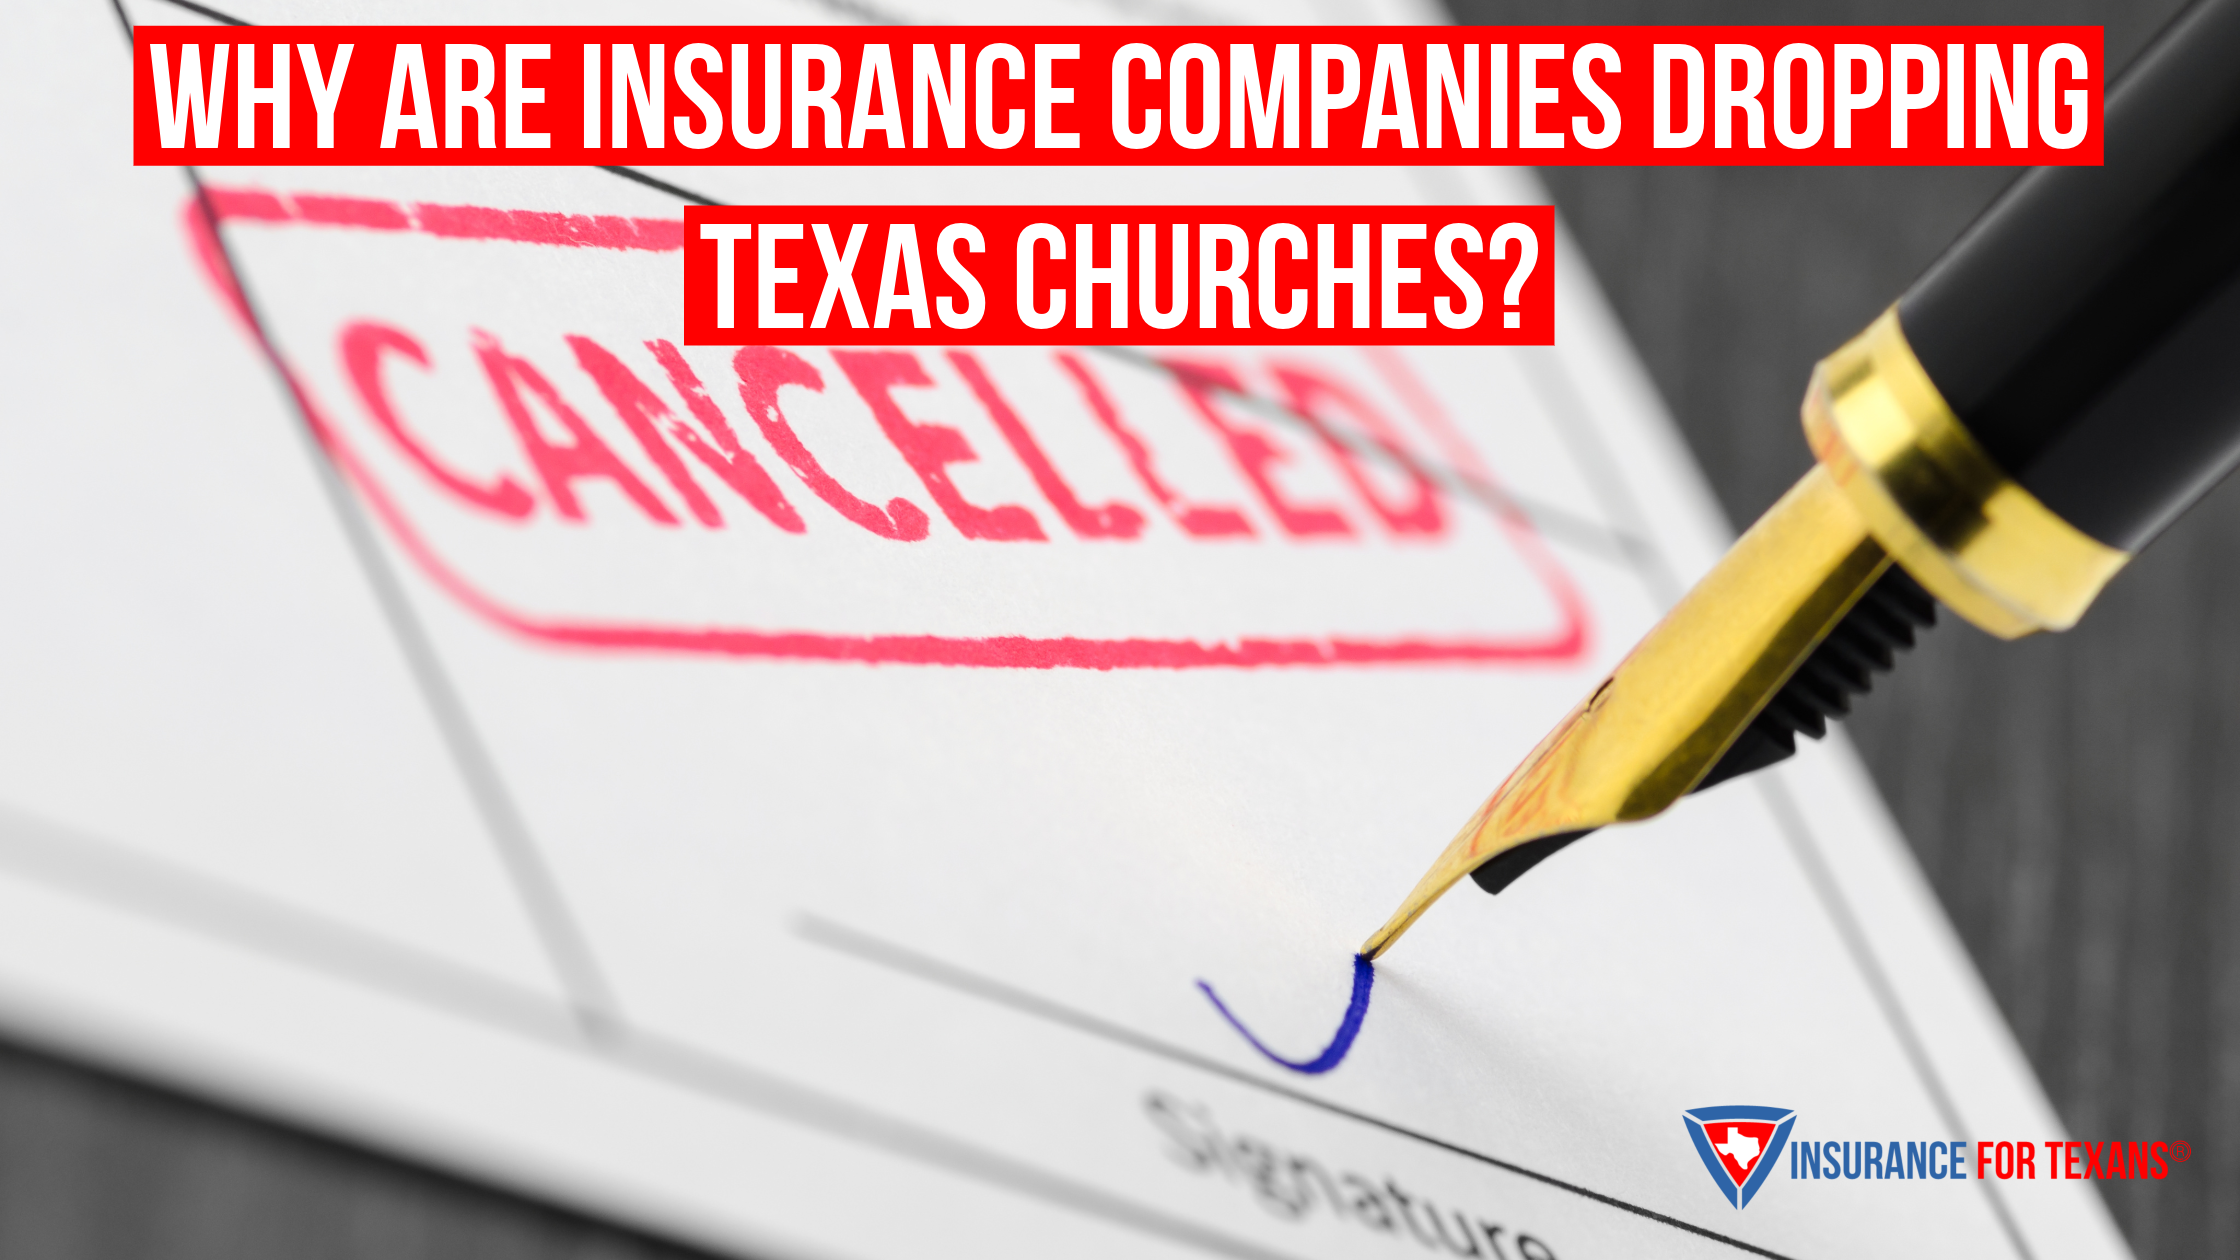 Why Are Insurance Companies Dropping Texas Churches?